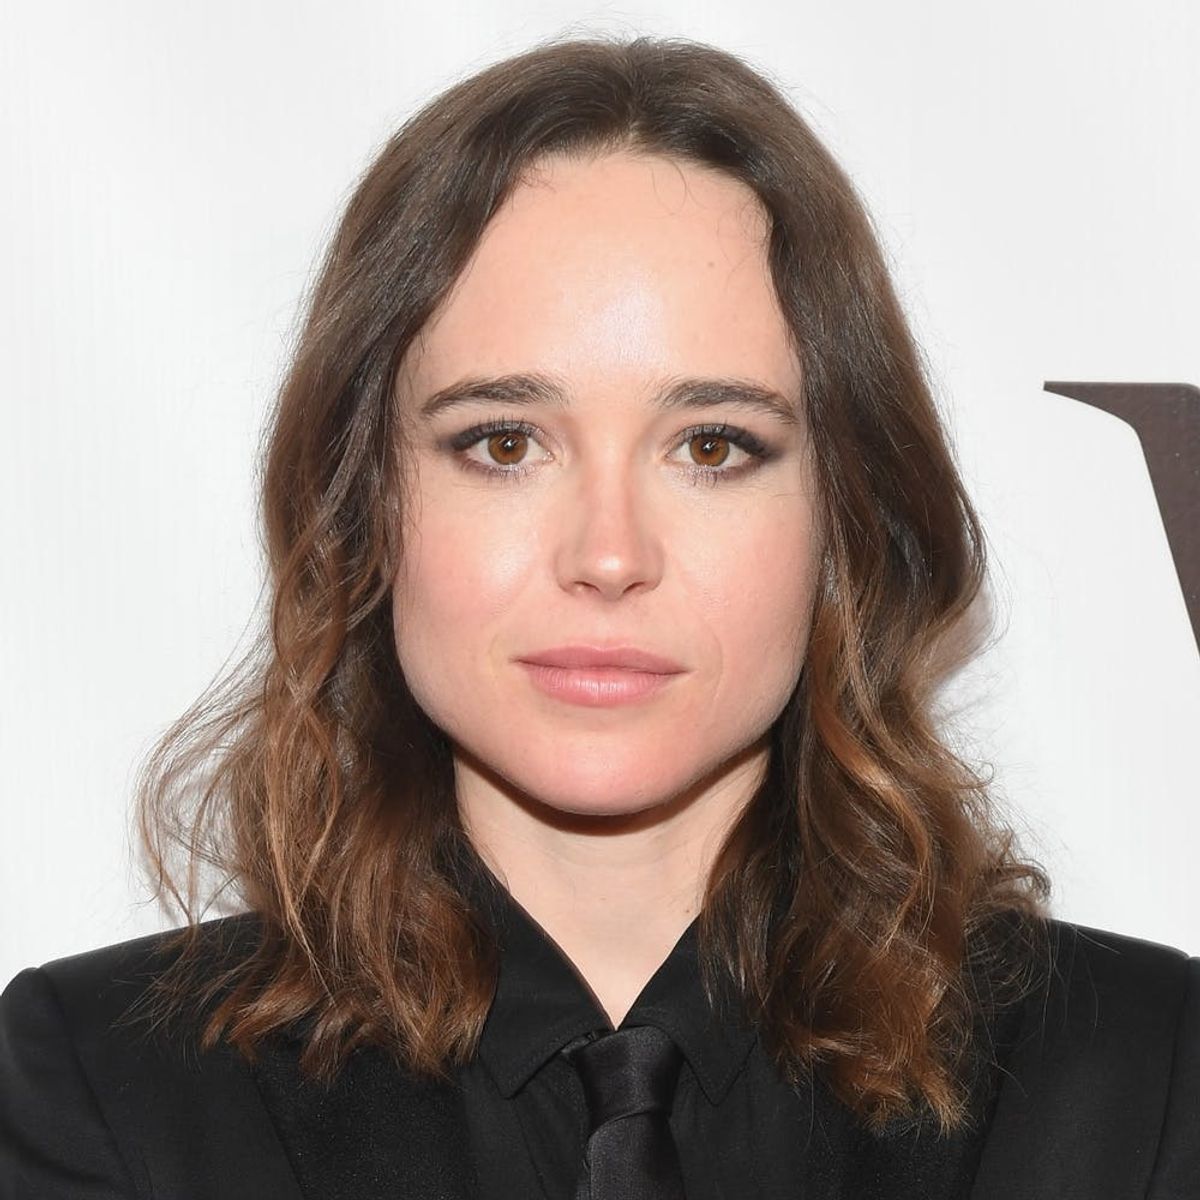 Ellen Page Accuses “X-Men: The Last Stand” Director of Homophobia and Sexual Harassment